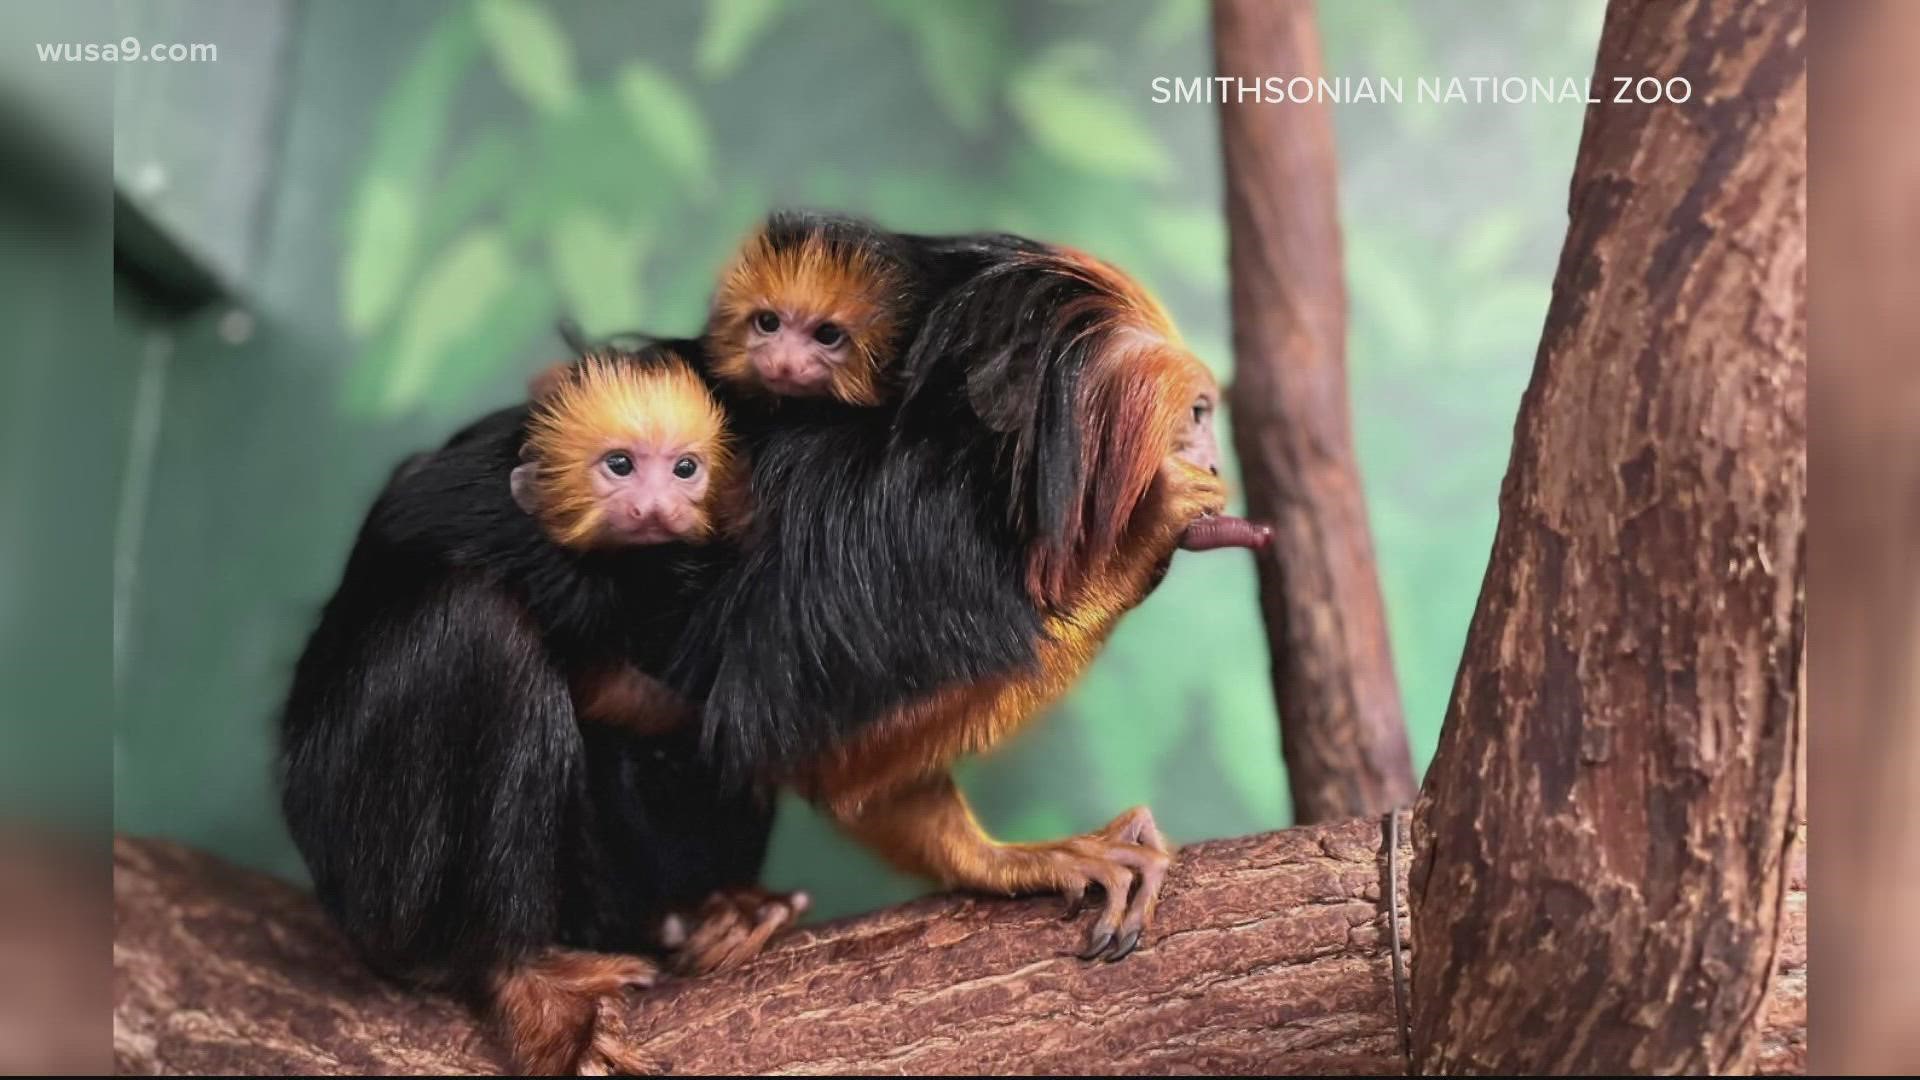 It's the first time in 16 years the zoo has welcomed golden-headed lion tamarin twins.